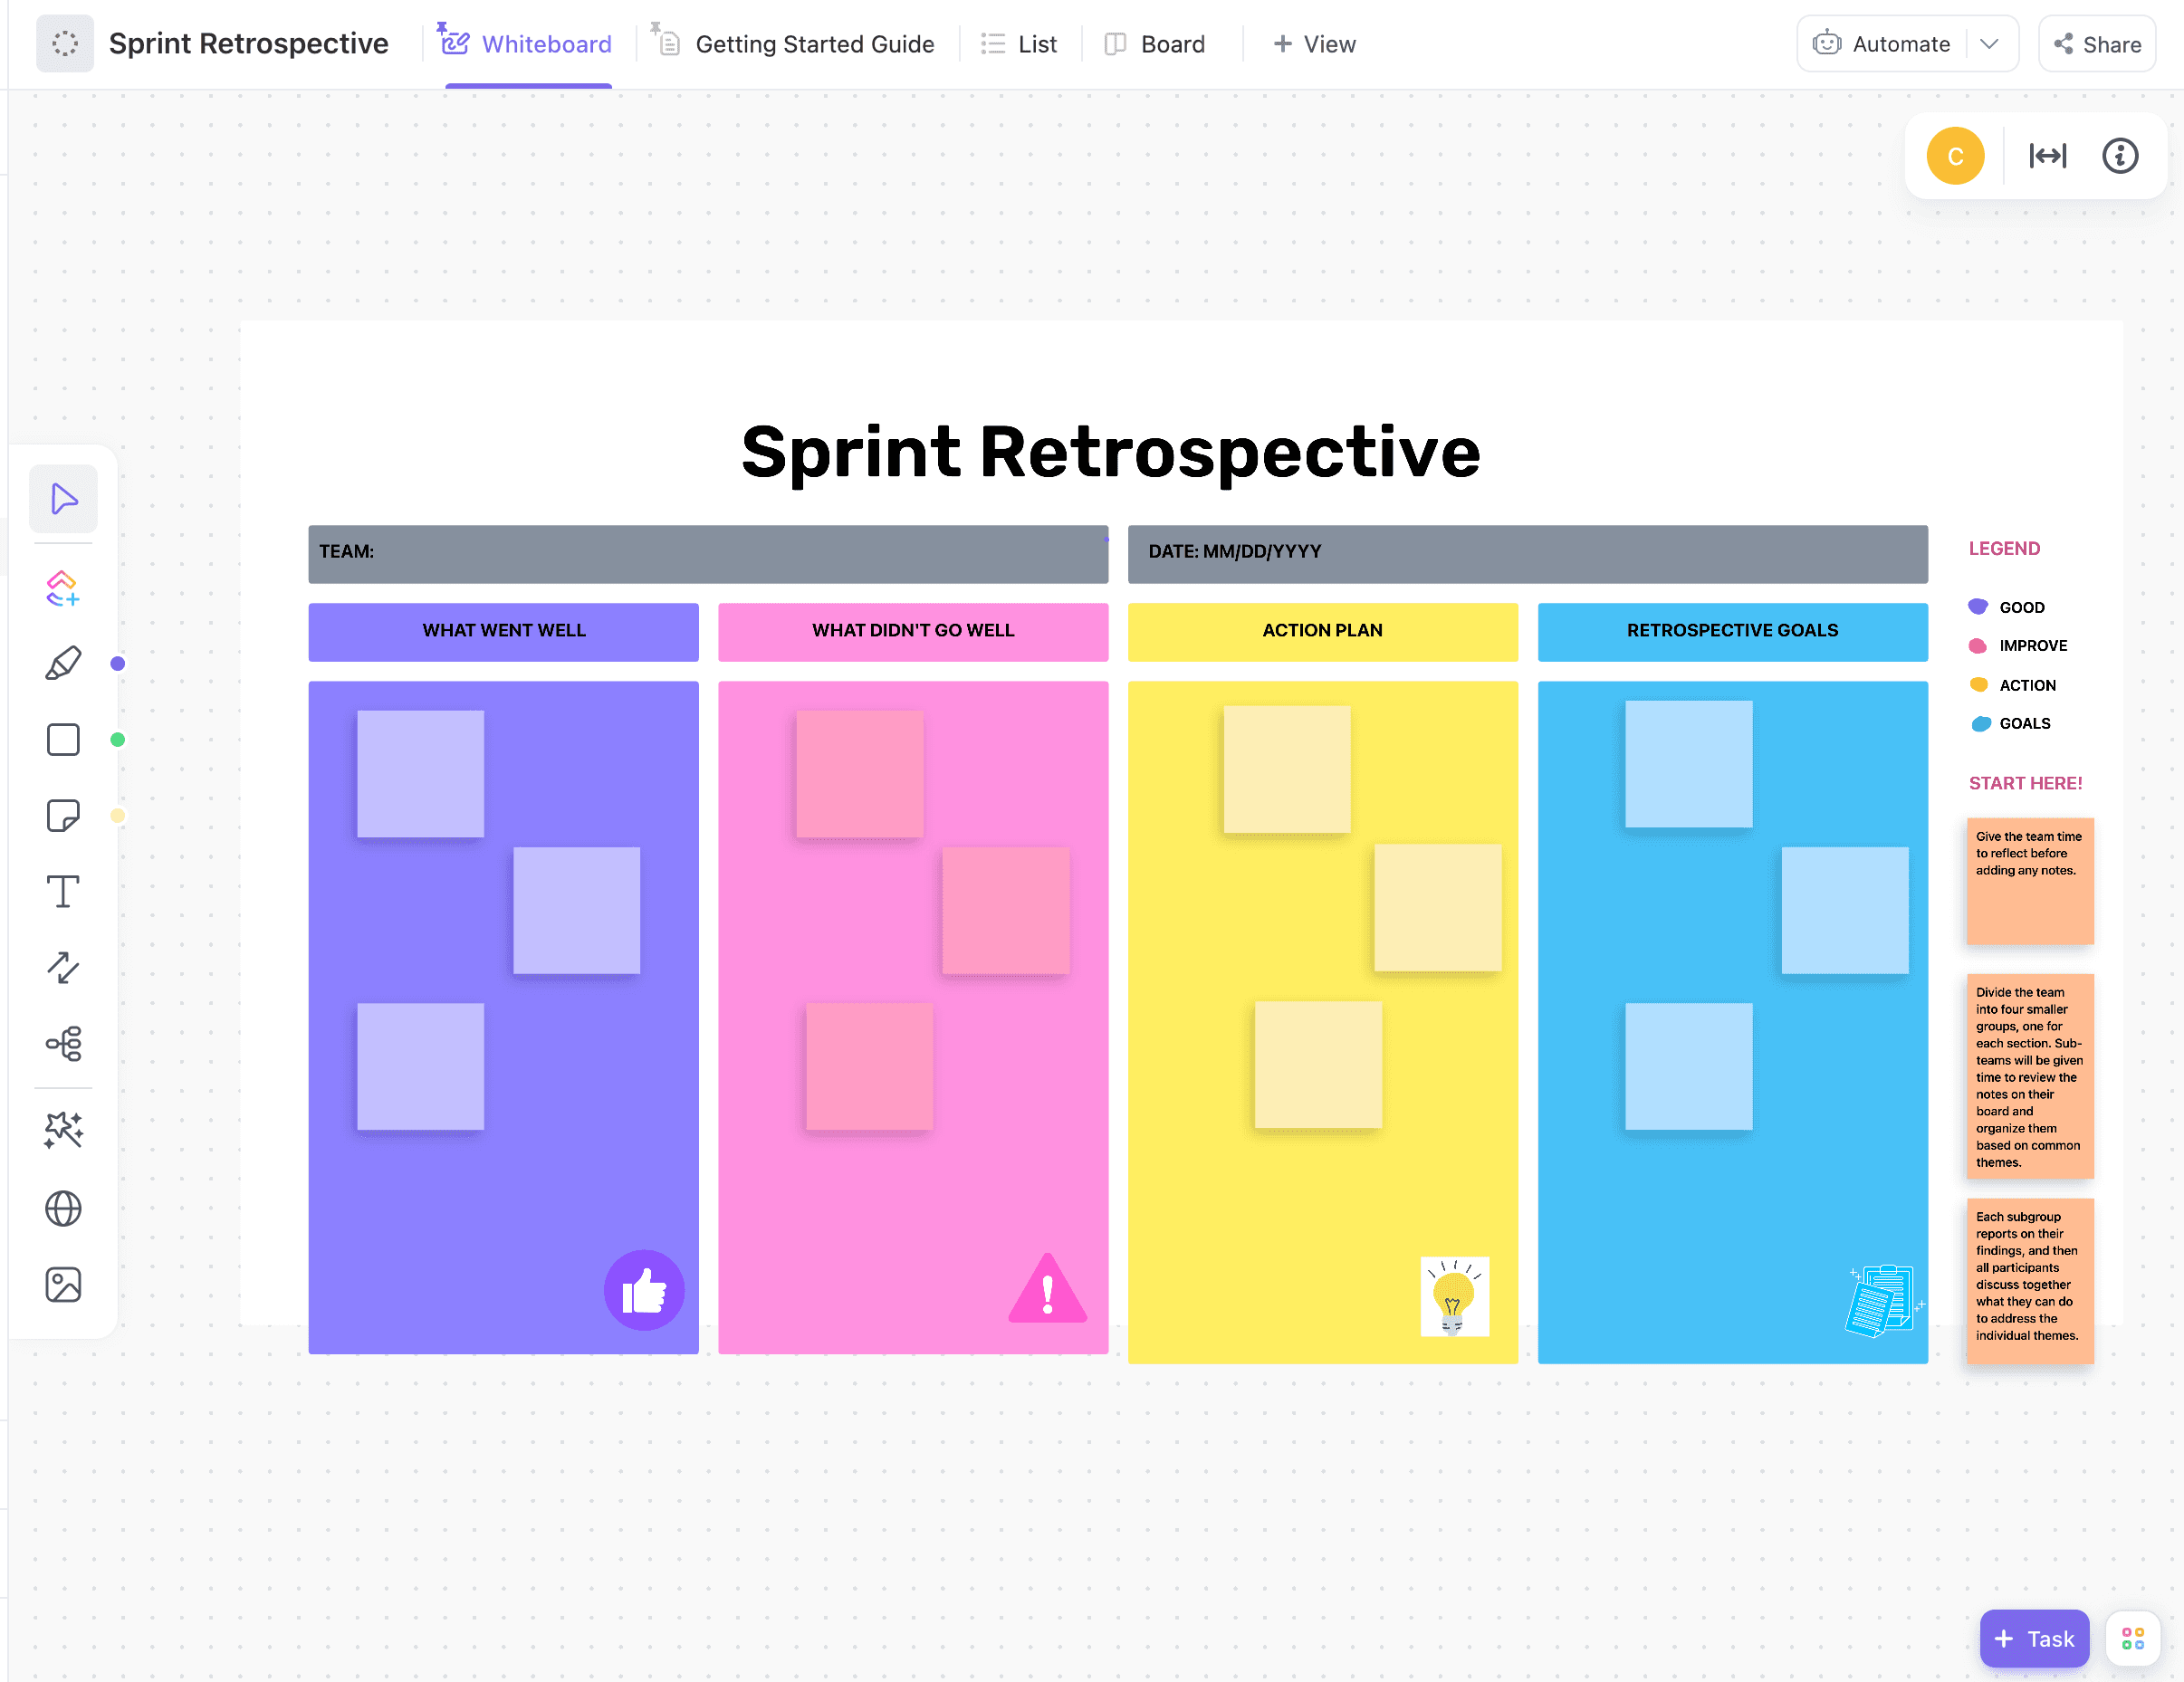 Save time and gain valuable insights with this simple Sprint Retrospective Template. Whether you are running an agile team or a project management office, this template will help you build a crystal-clear picture of what went well, what didn't go so well, and what to change in the future.